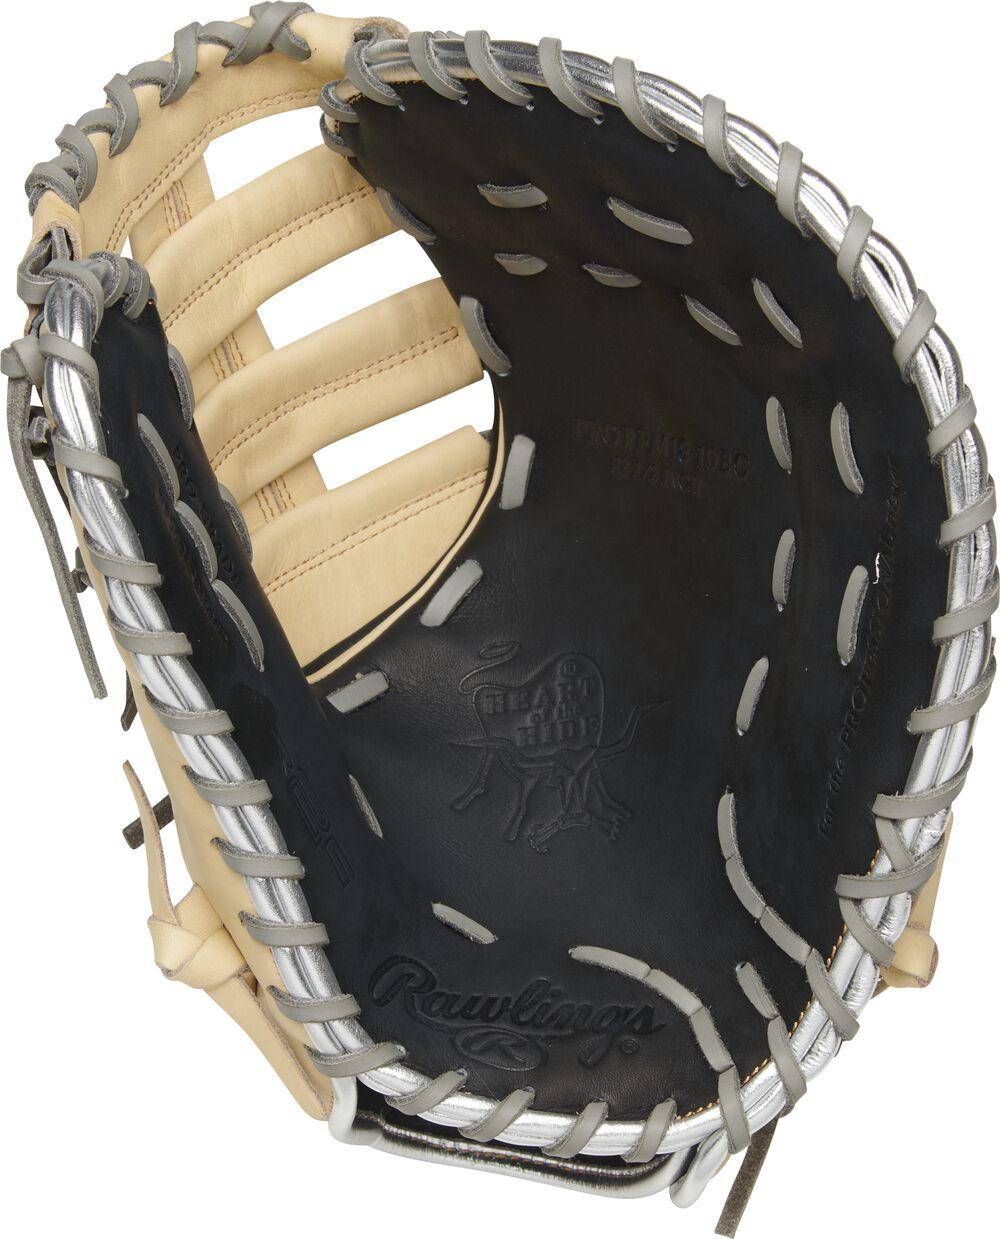 Heart of the Hide R2G 12.5" First Base Baseball Glove - Sports Excellence